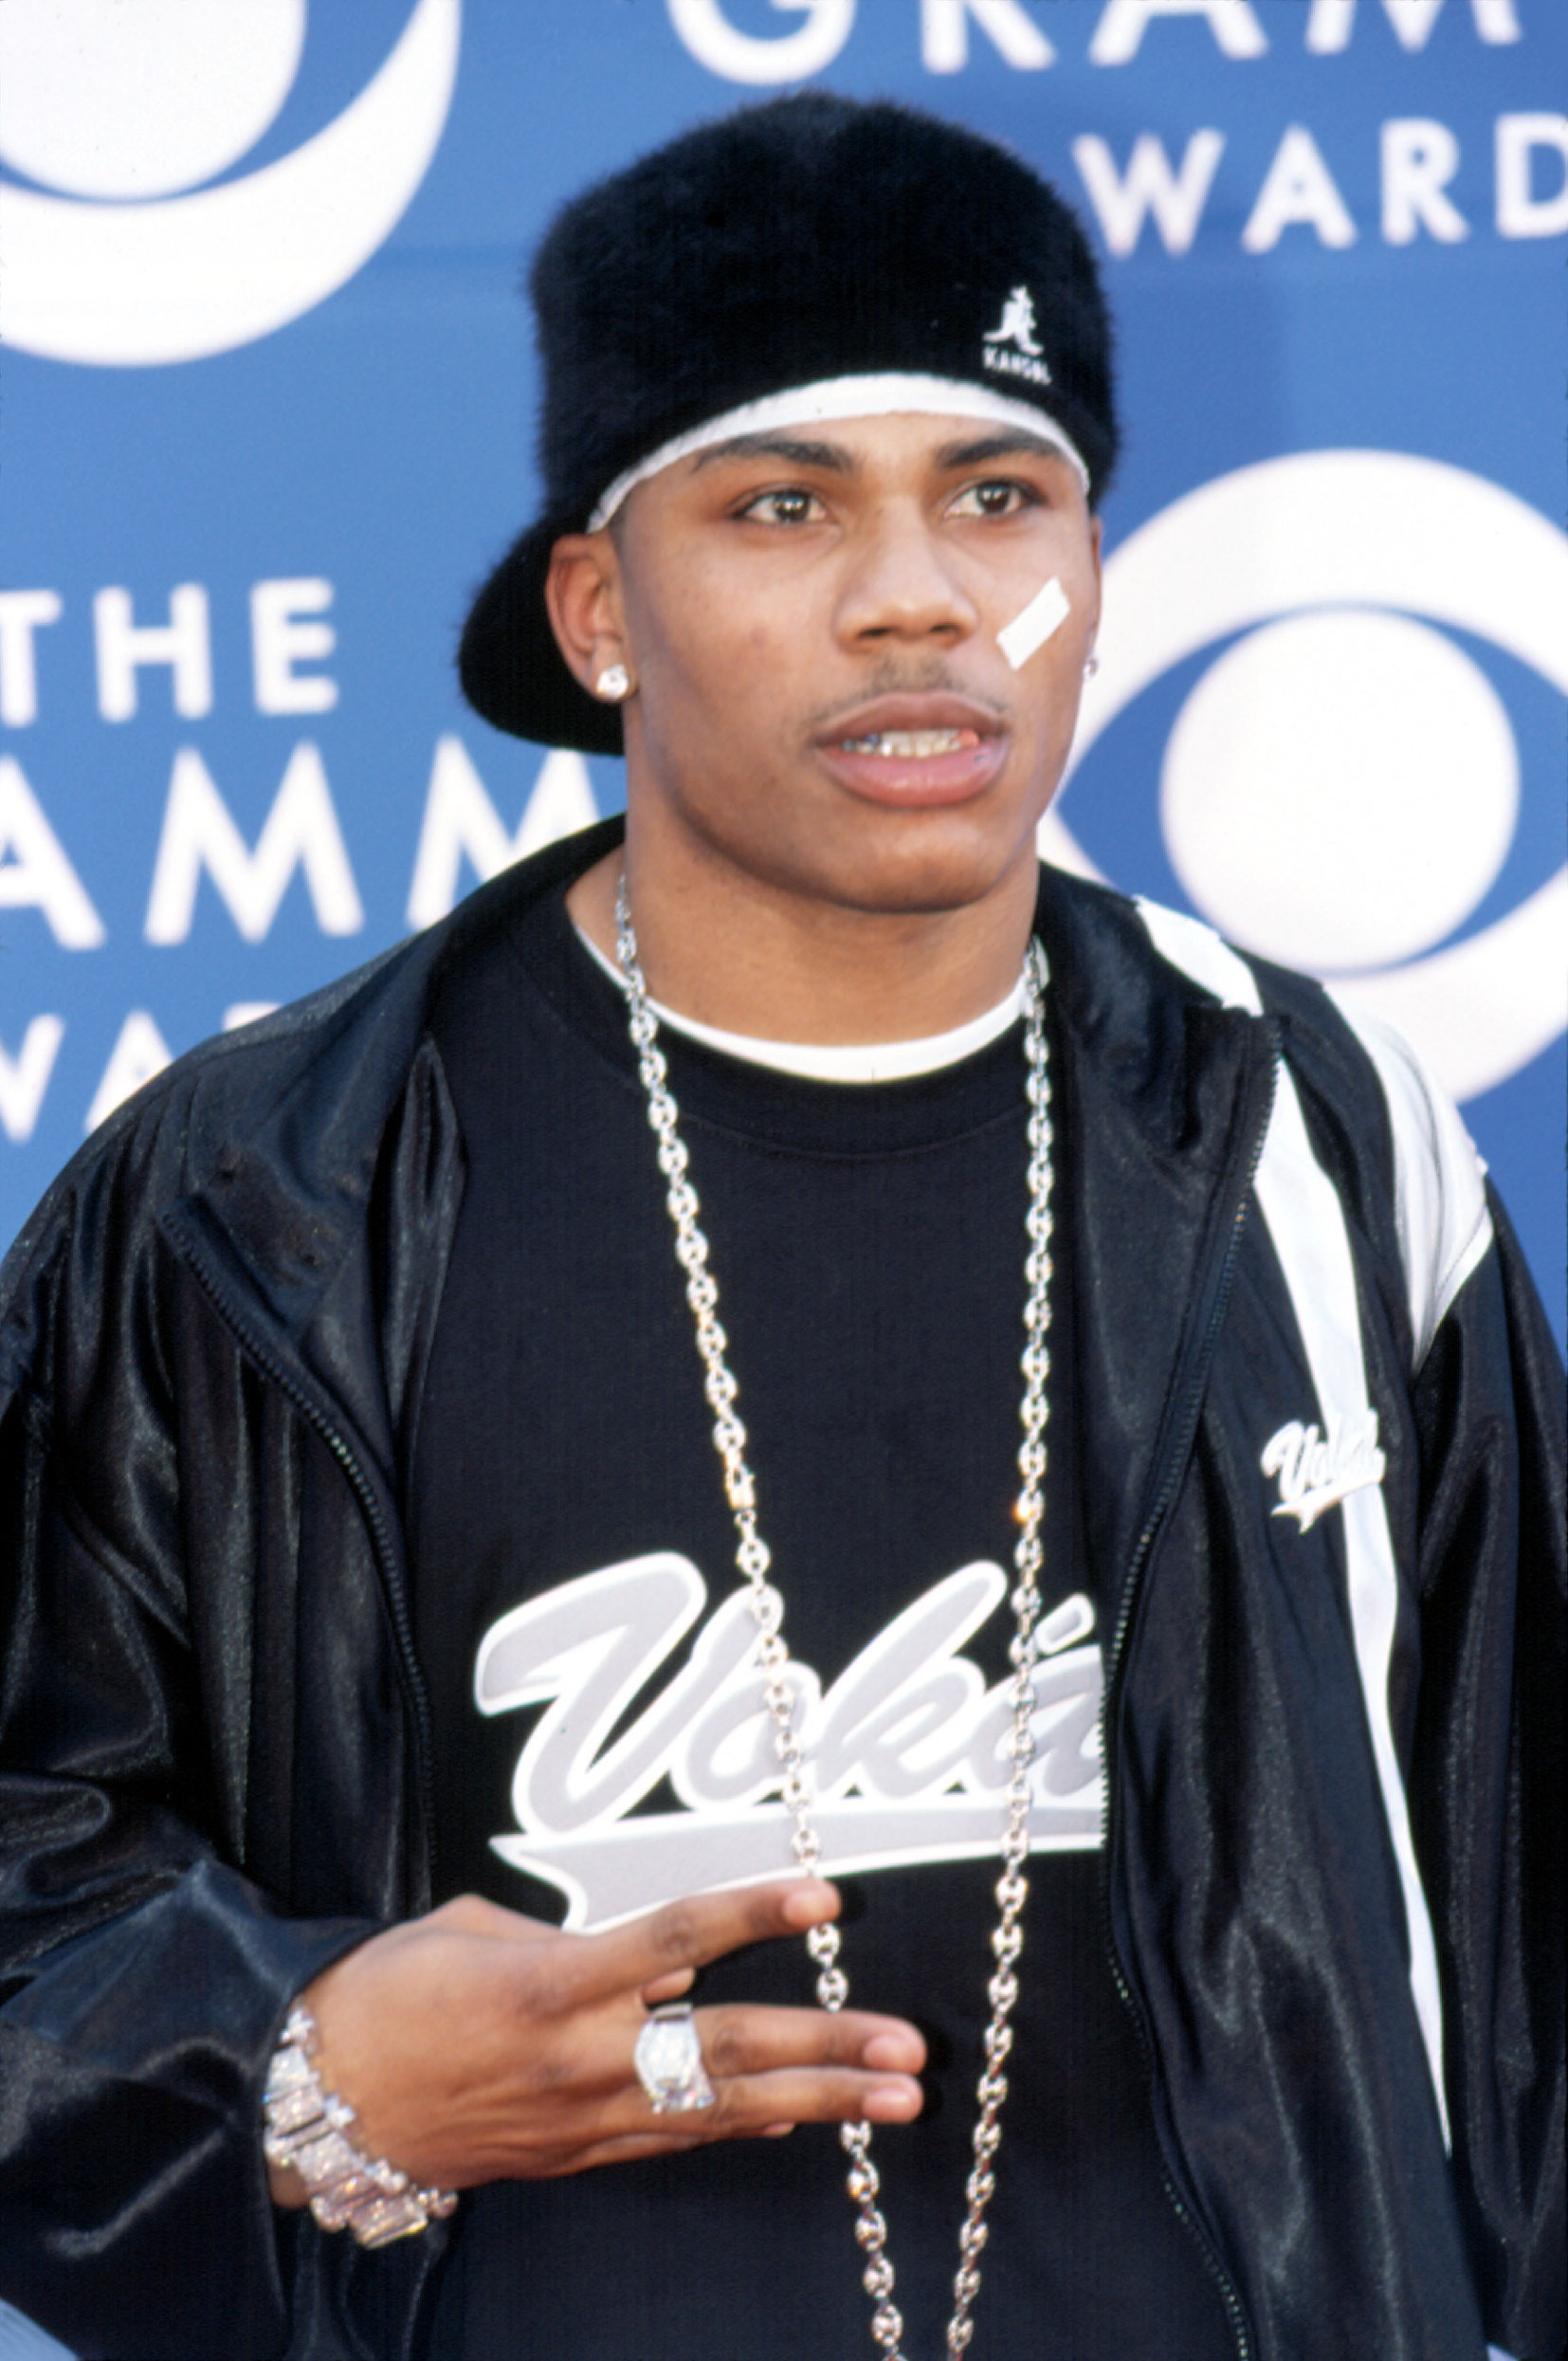 Nelly's Band-Aid And Other Celeb Accessory Tales